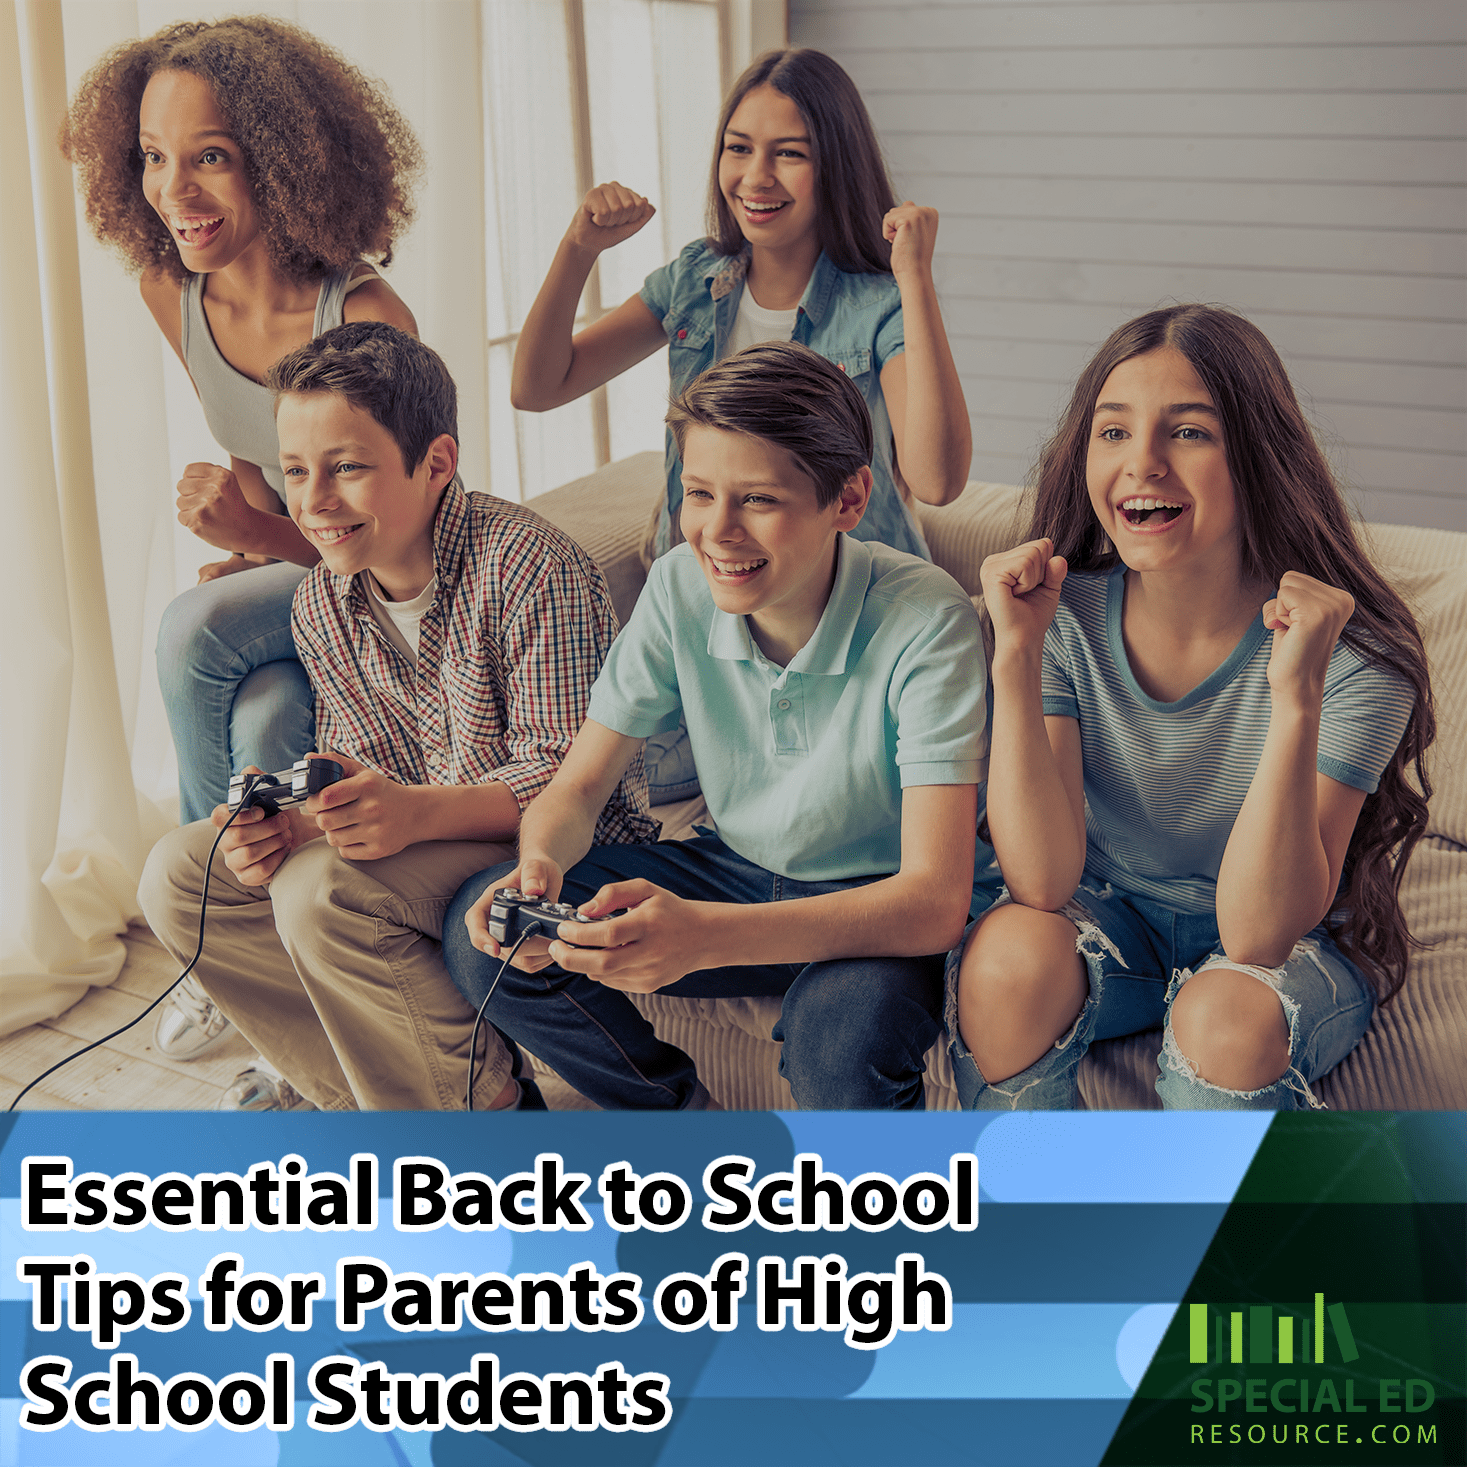 Group of teens playing a video game together, which is an example of one of the 5 Back to School Tips for Parents of High School Students.